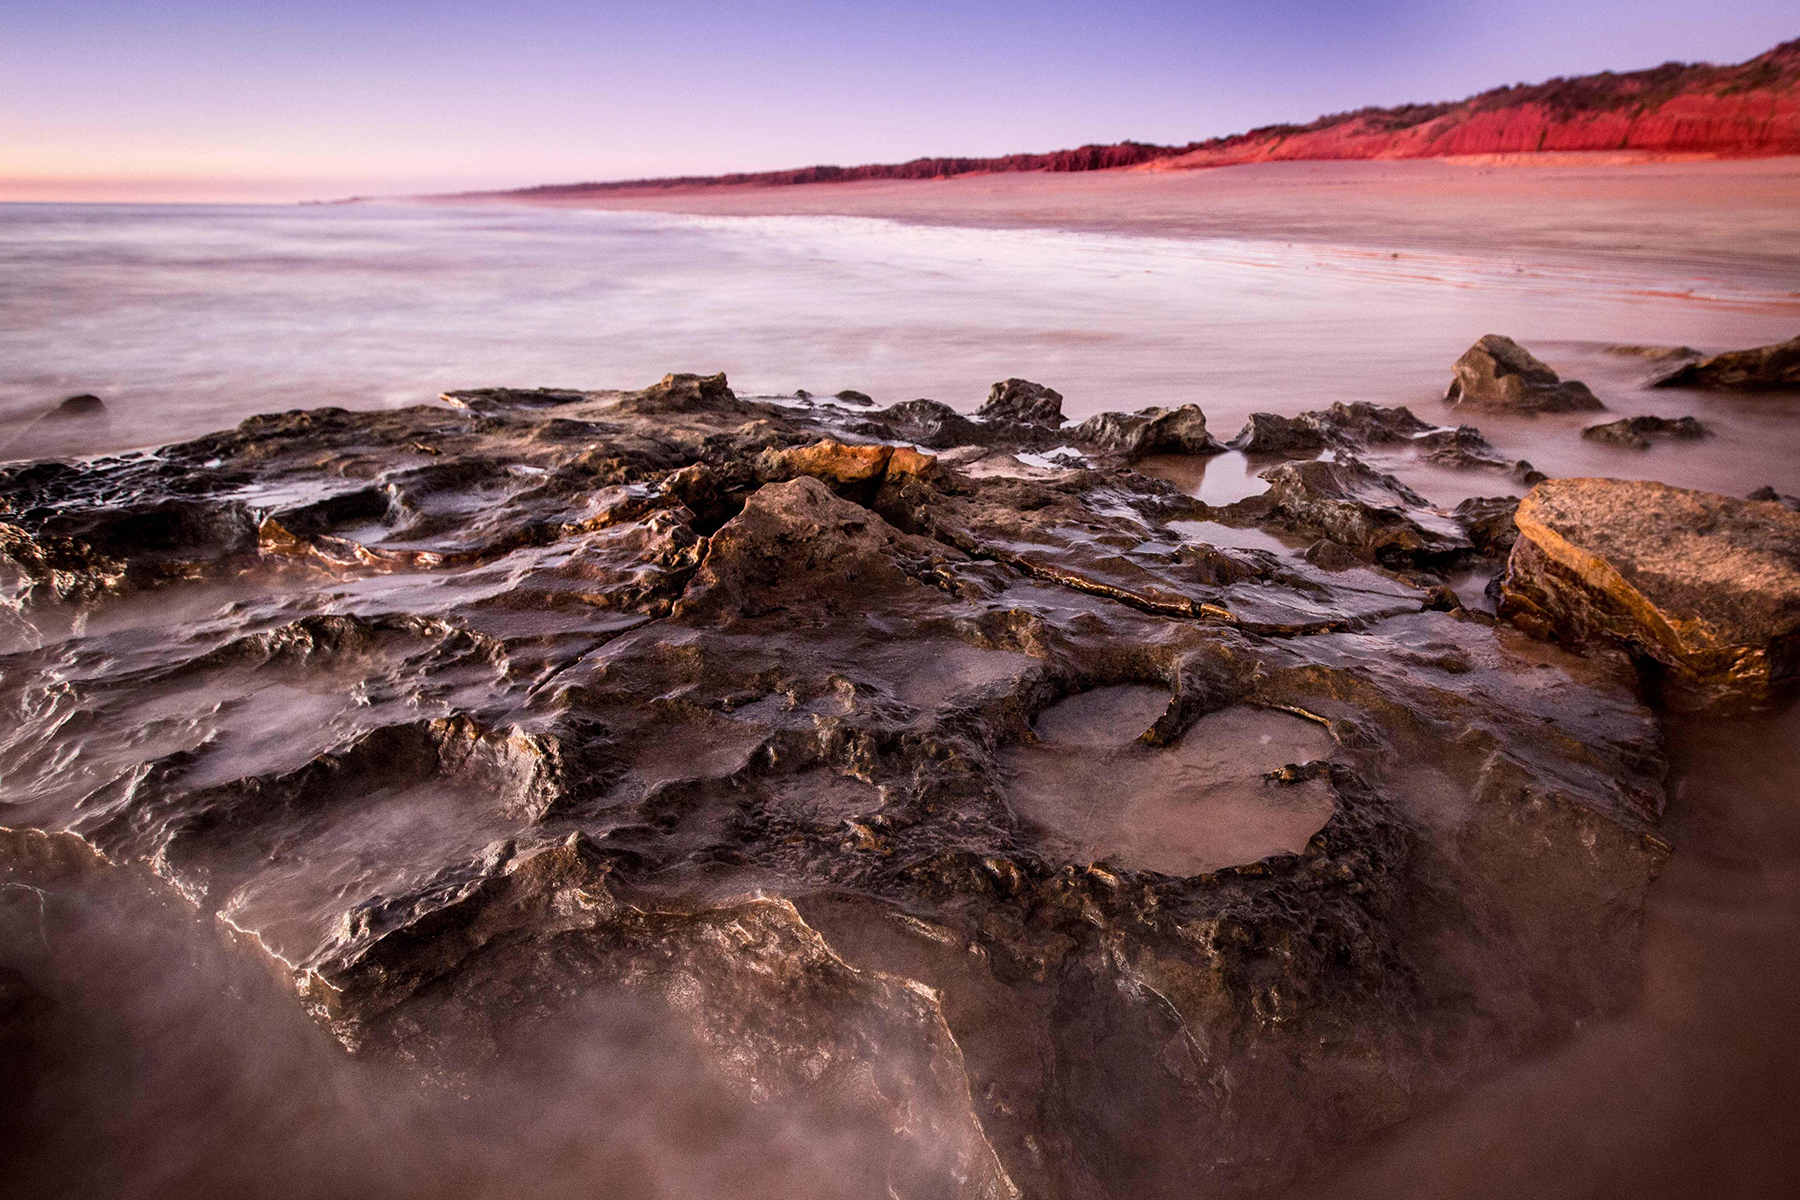 PHOTO:  An "unprecedented" 21 different types of dinosaur tracks have been found on a stretch of Australia's remote coastline, scientists said on March 27, 2017, referring to it as the nation's Jurassic Park.